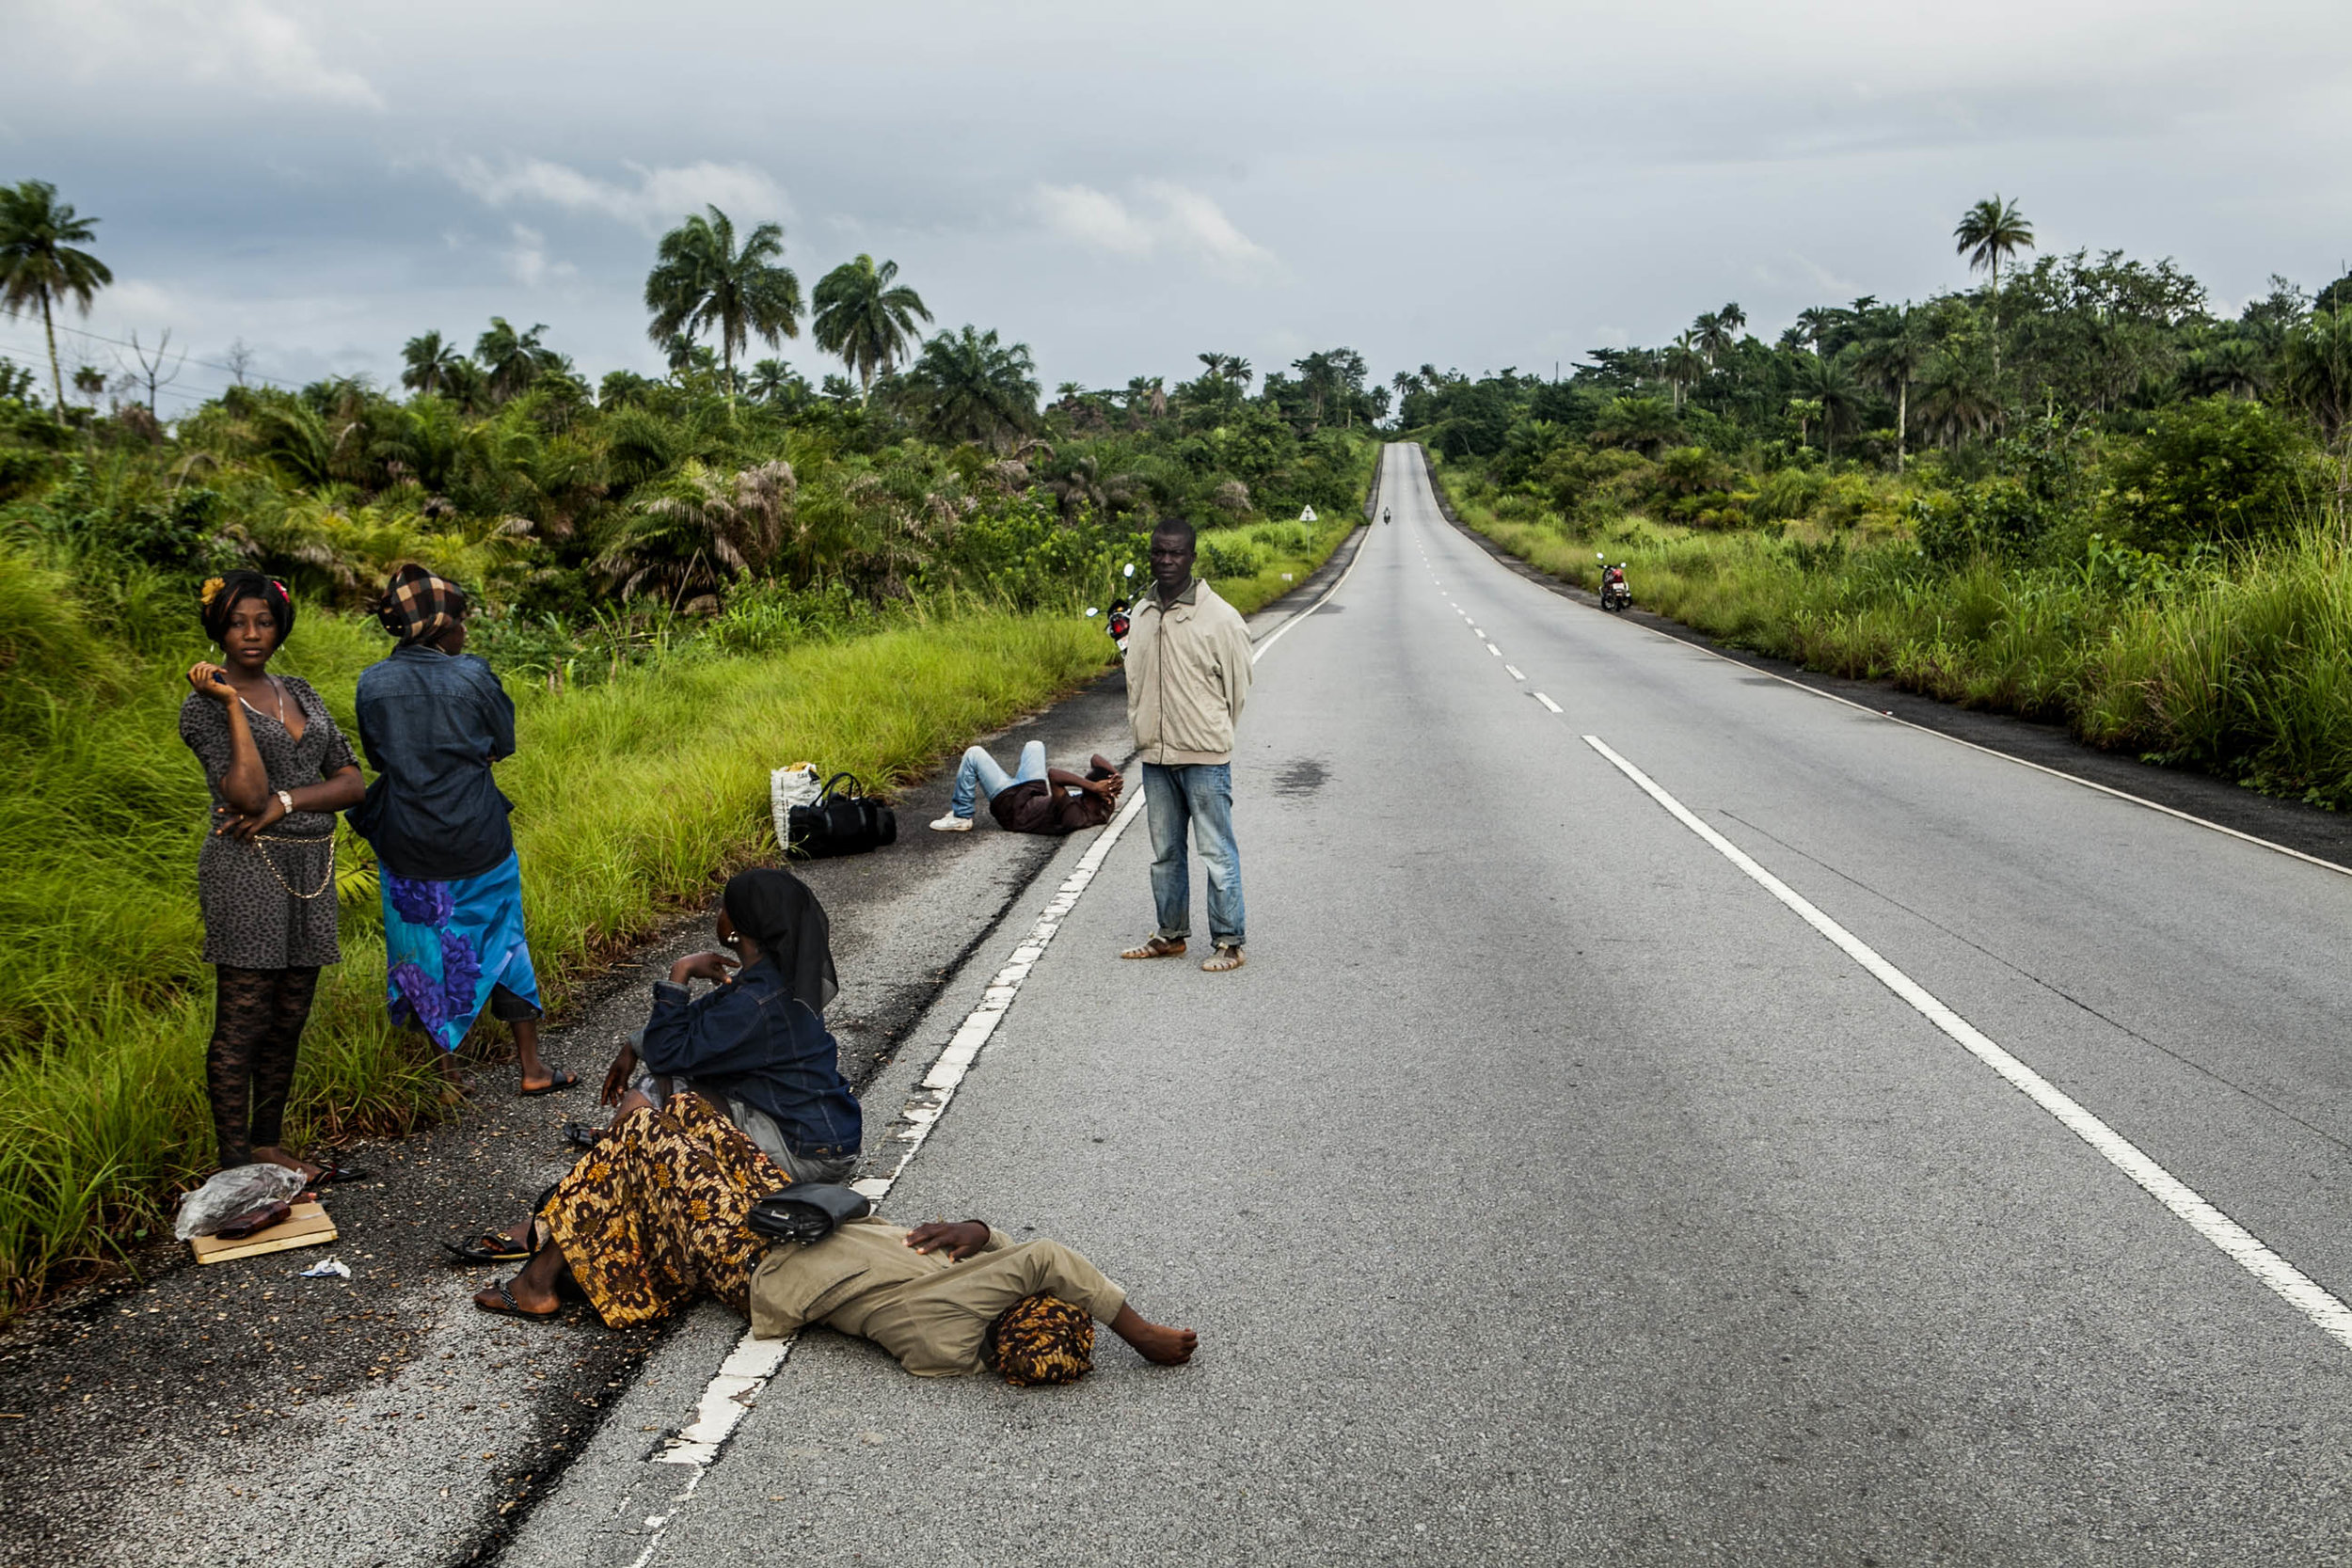  People who were denied passage at a checkpoint outside of Kenema wait on the roadside on Friday, August 22, 2014. Only those in possession of a government issued permit are allowed to cross Ebola quarantine checkpoints. (Pete Muller/Prime for the Wa